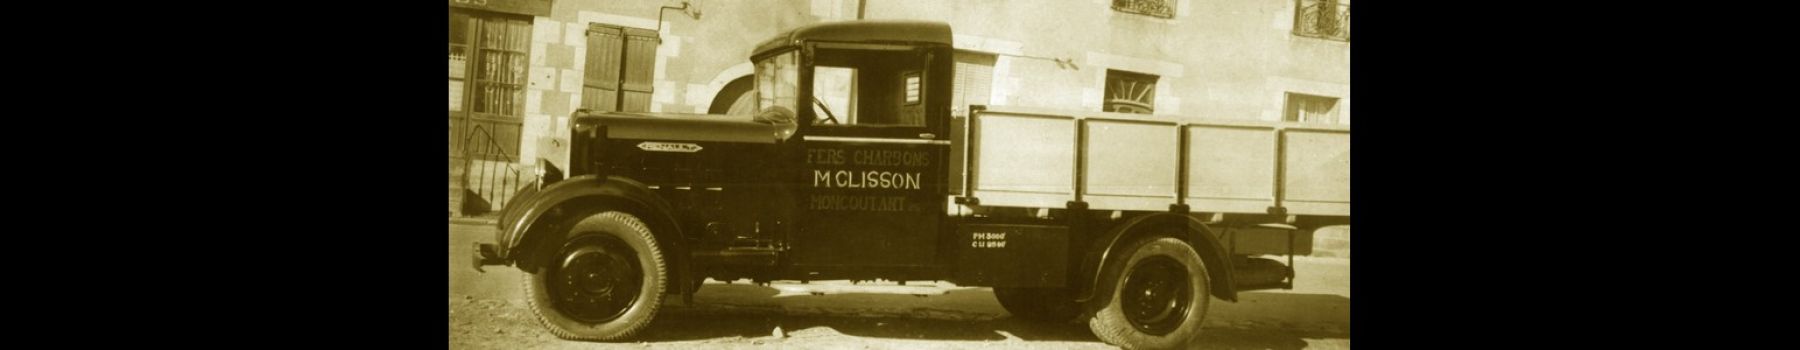 camion clisson1